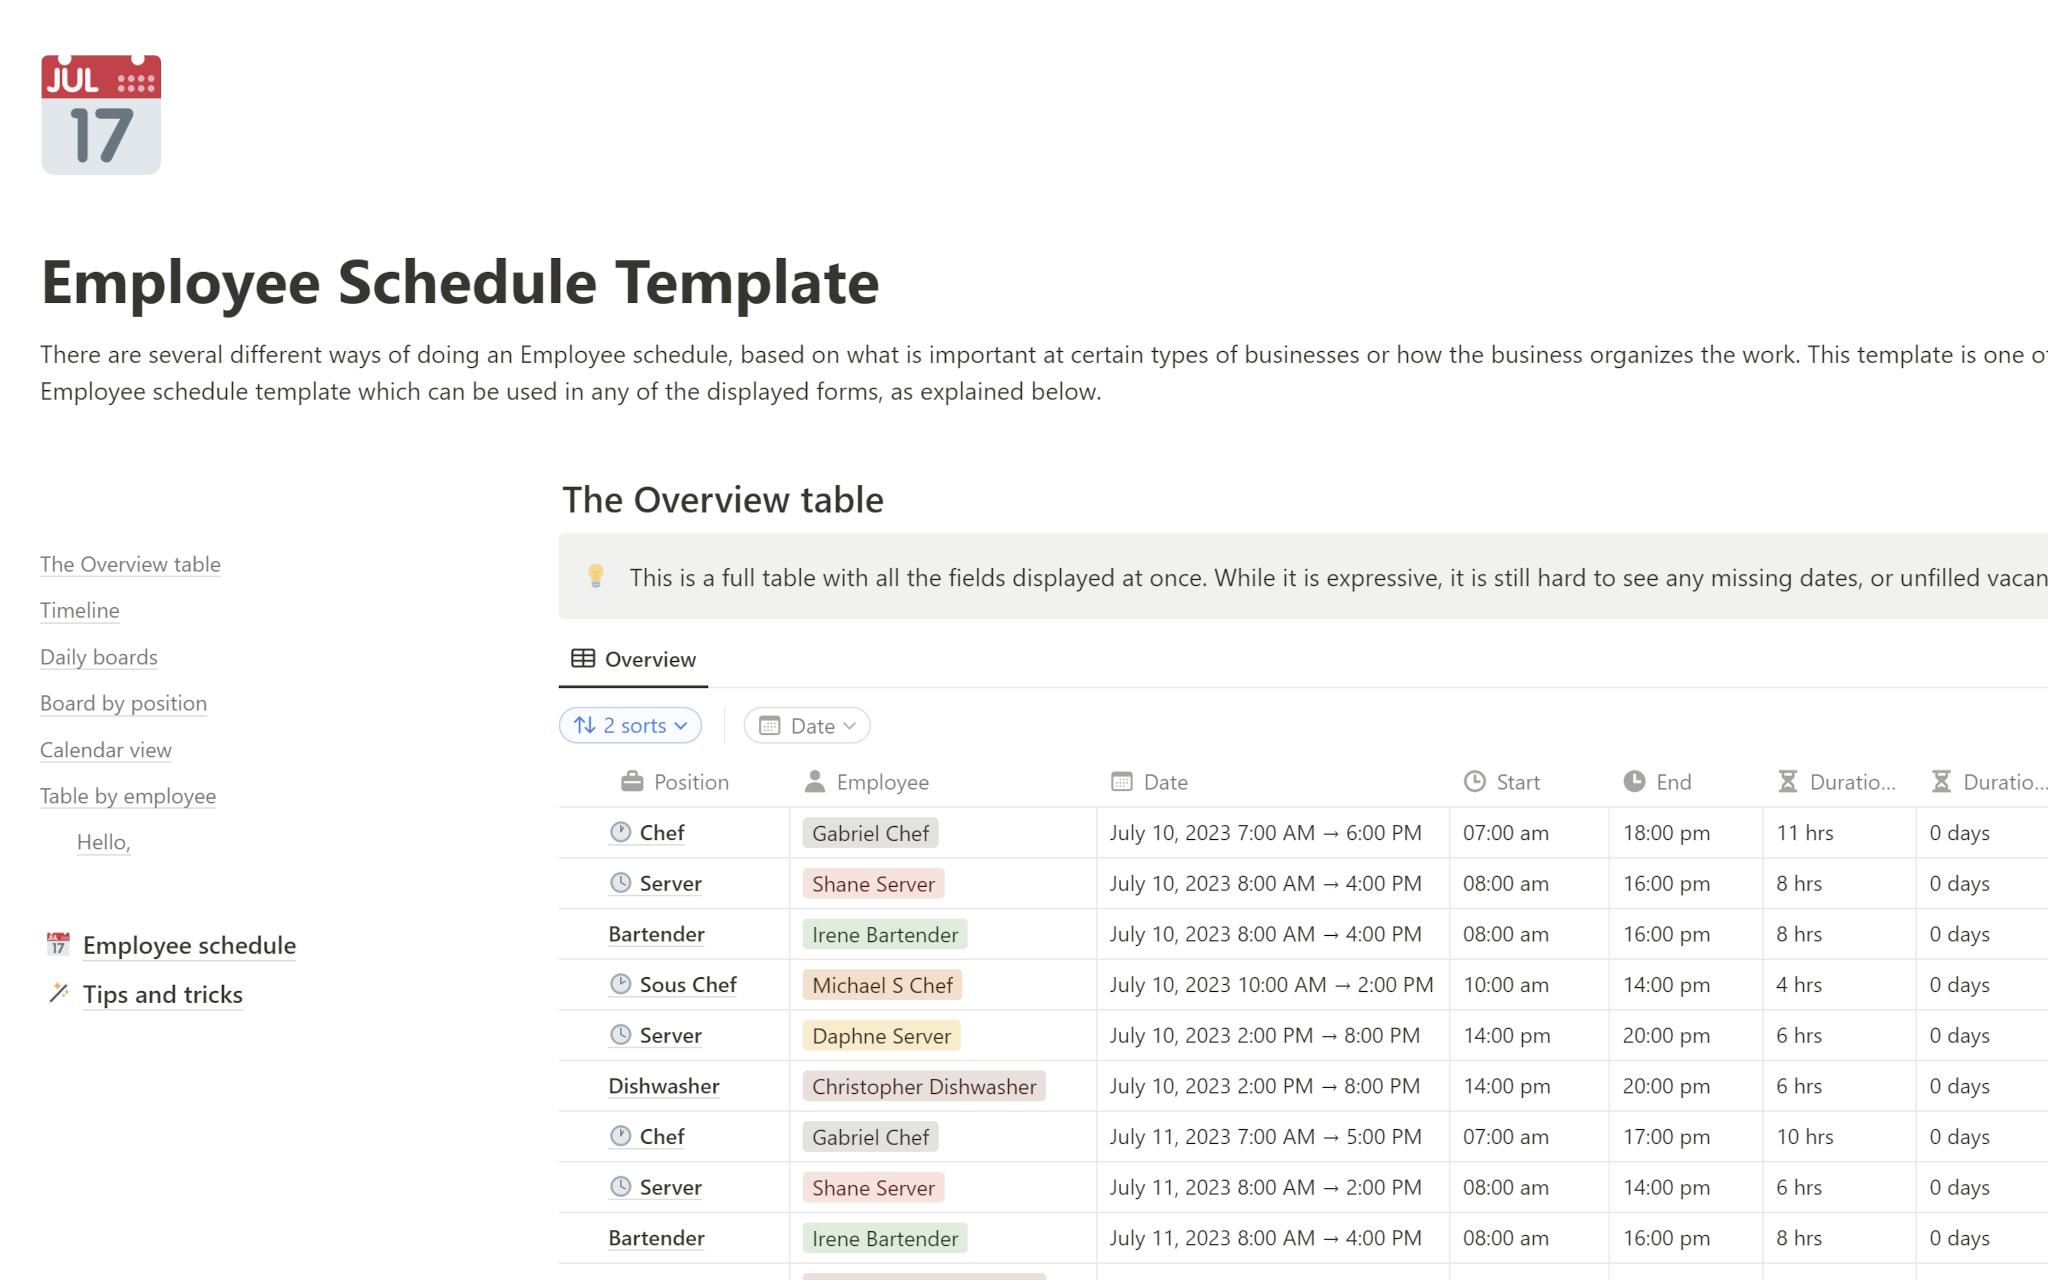 Manage your organization's working hours with ease.